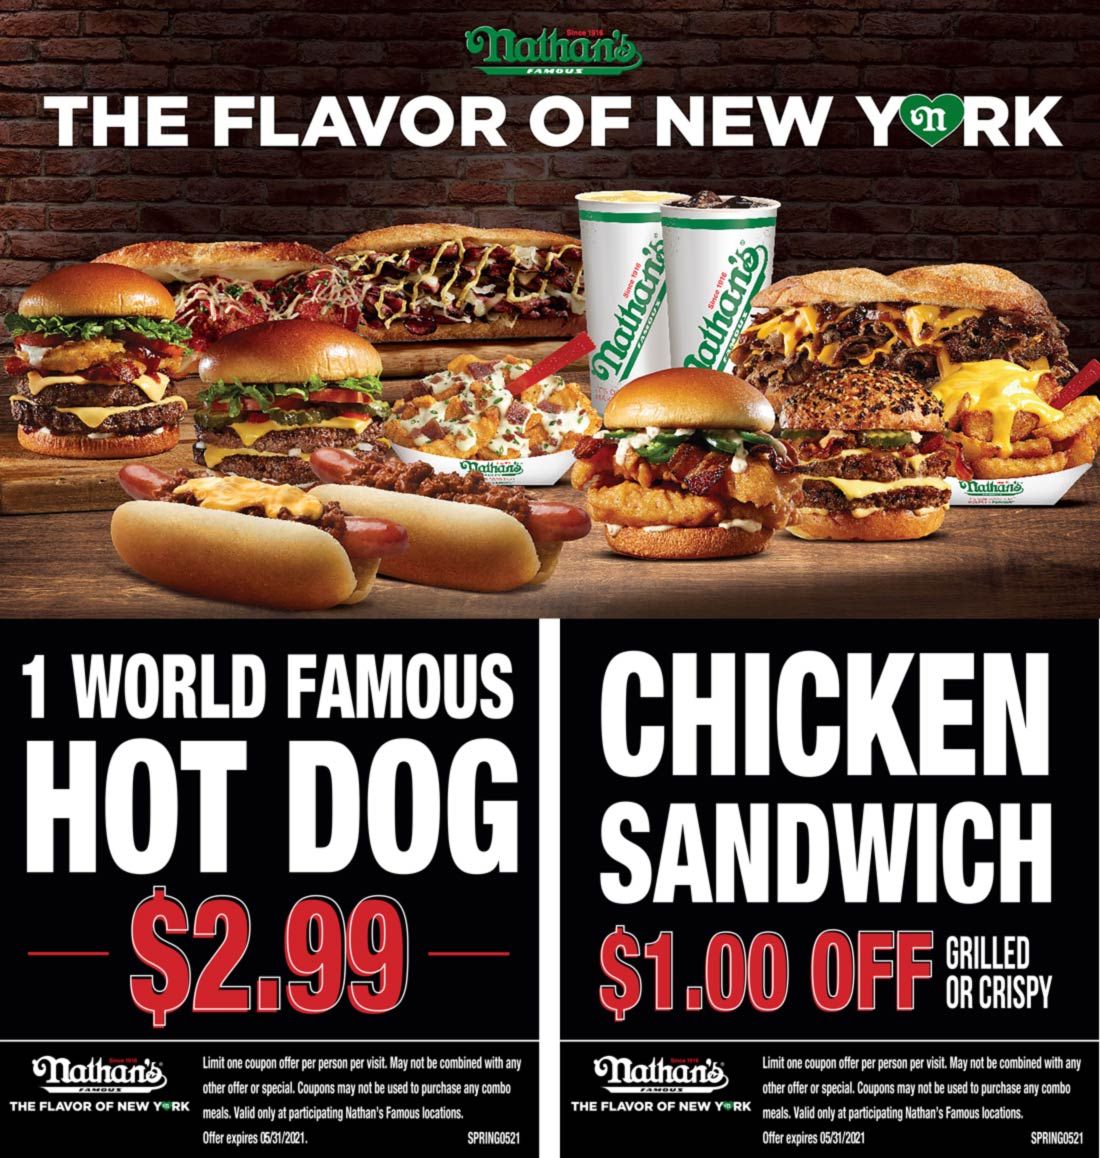 Nathans Famous restaurants Coupon  $3 hot dogs at Nathans Famous restaurants #nathansfamous 